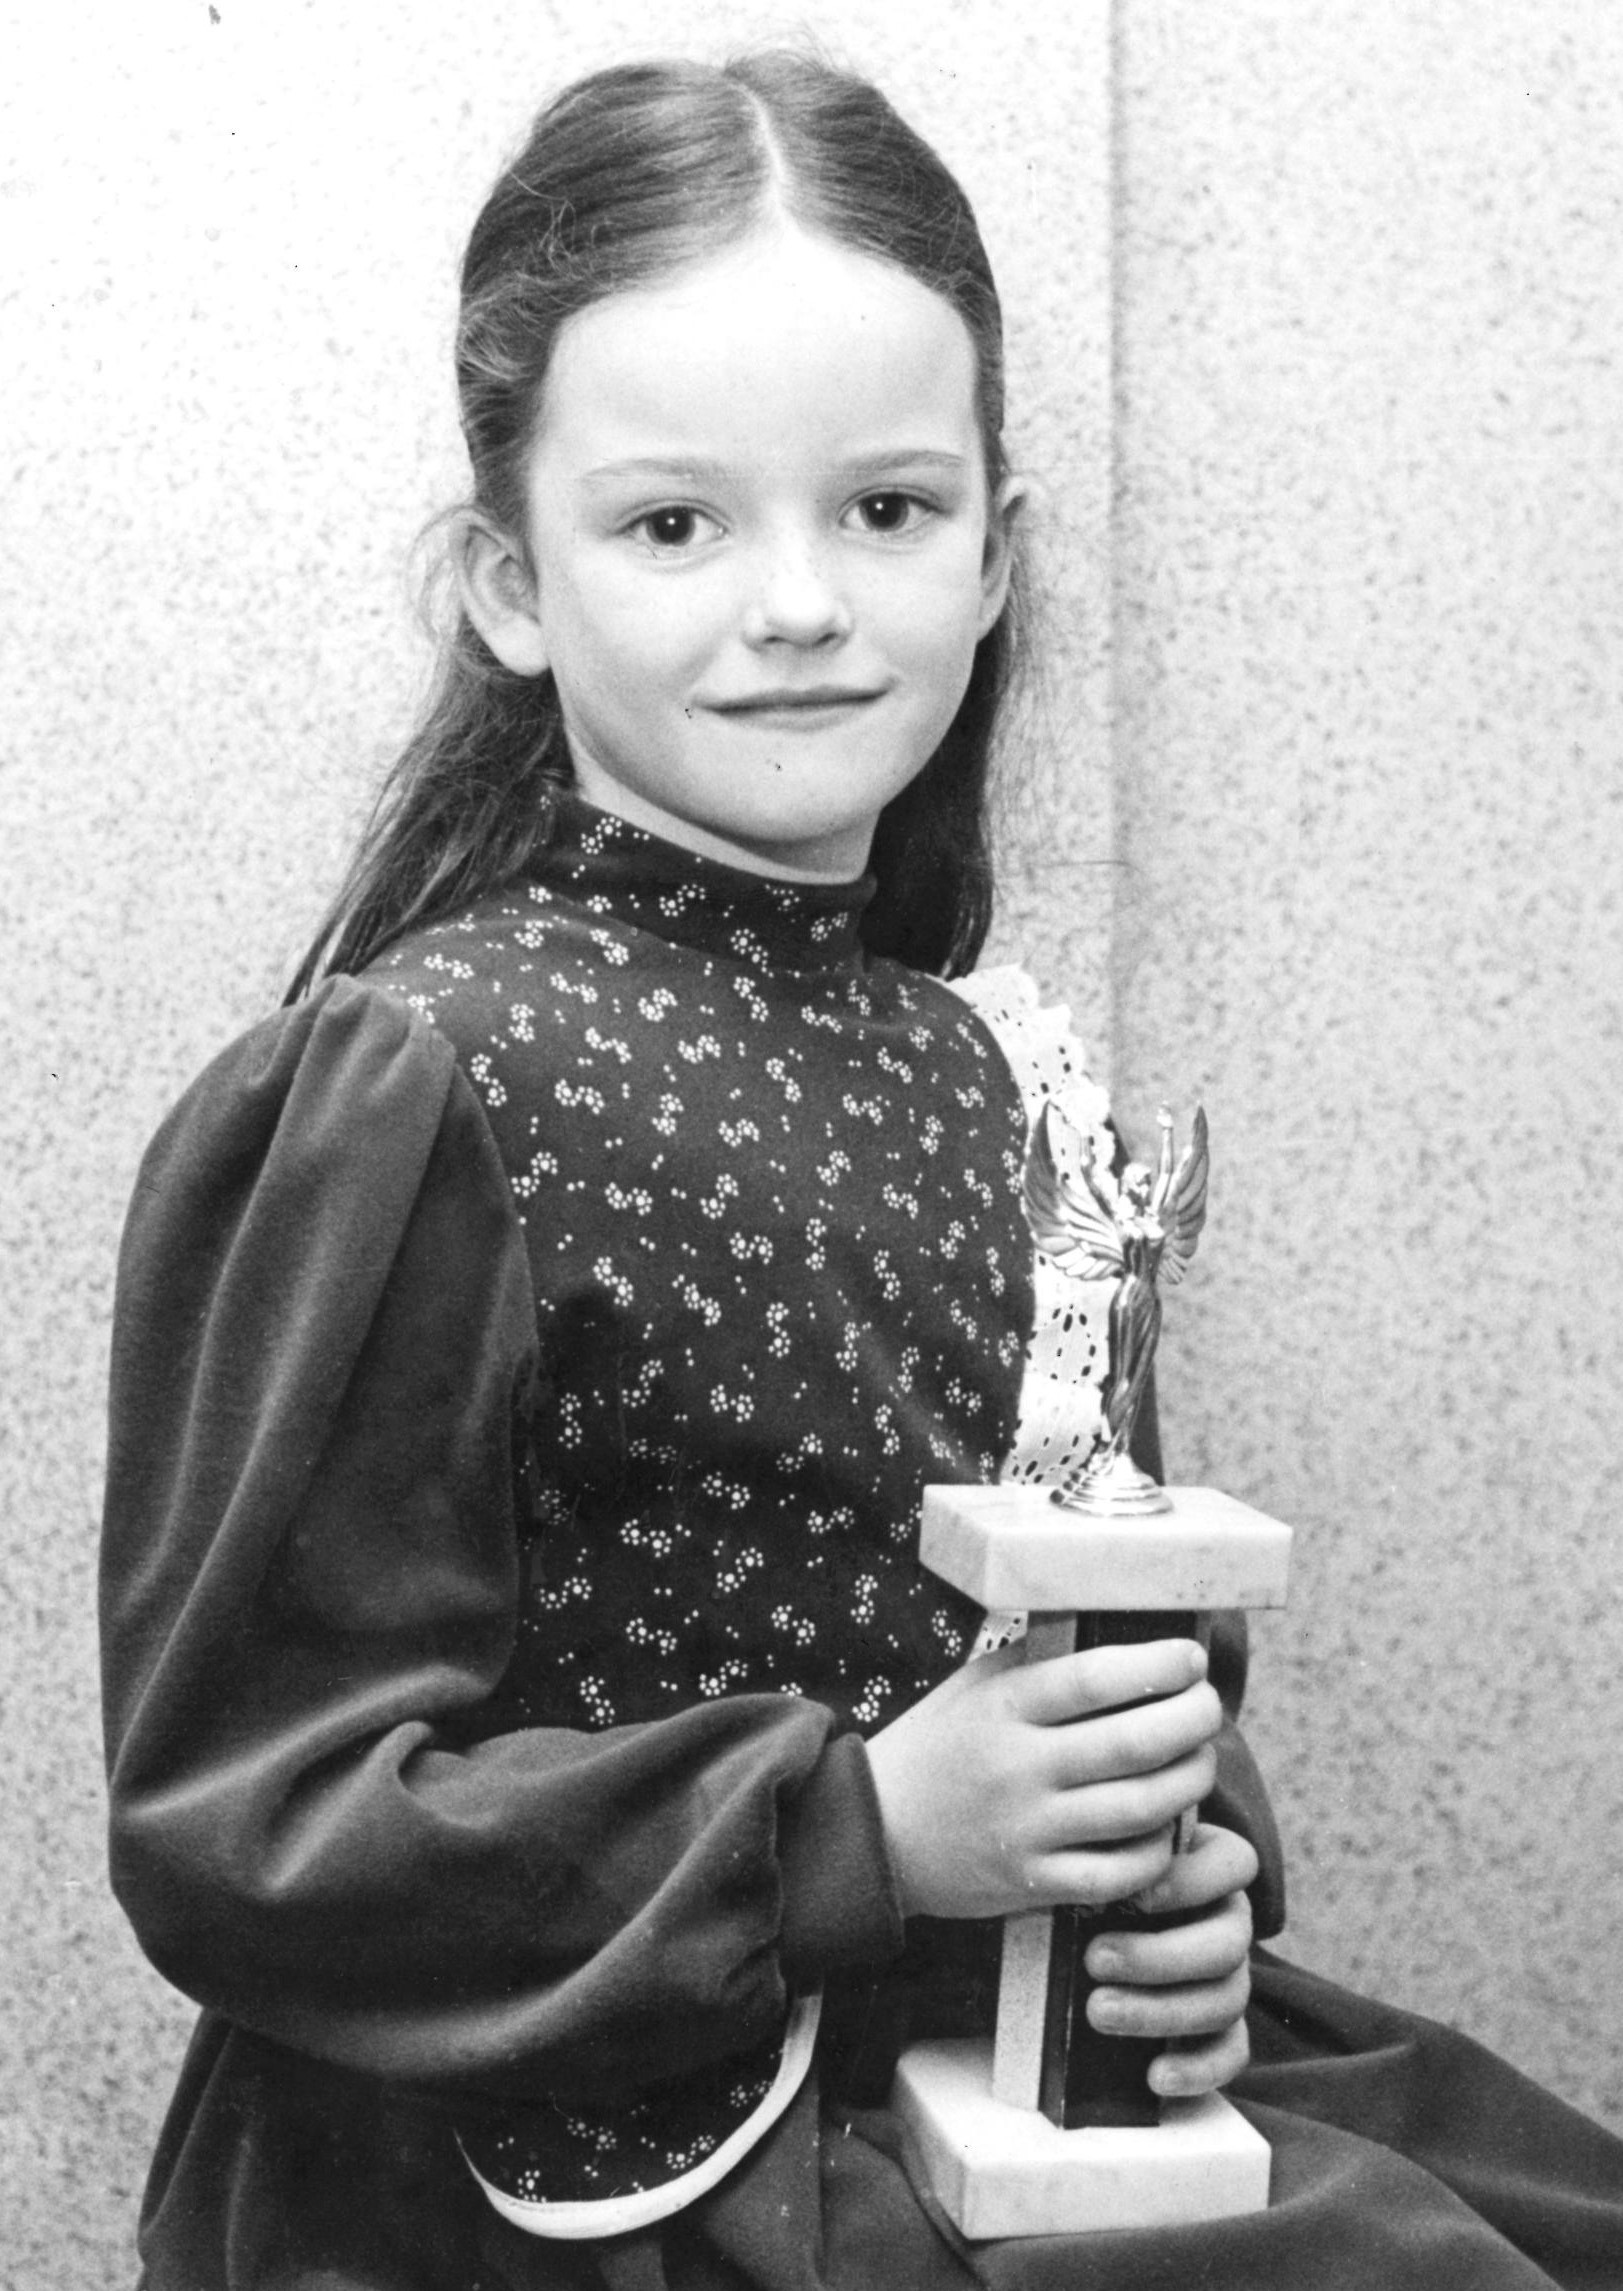 Claire Falconer won a trophy for poetry at the Fermanagh Feis in 1985.